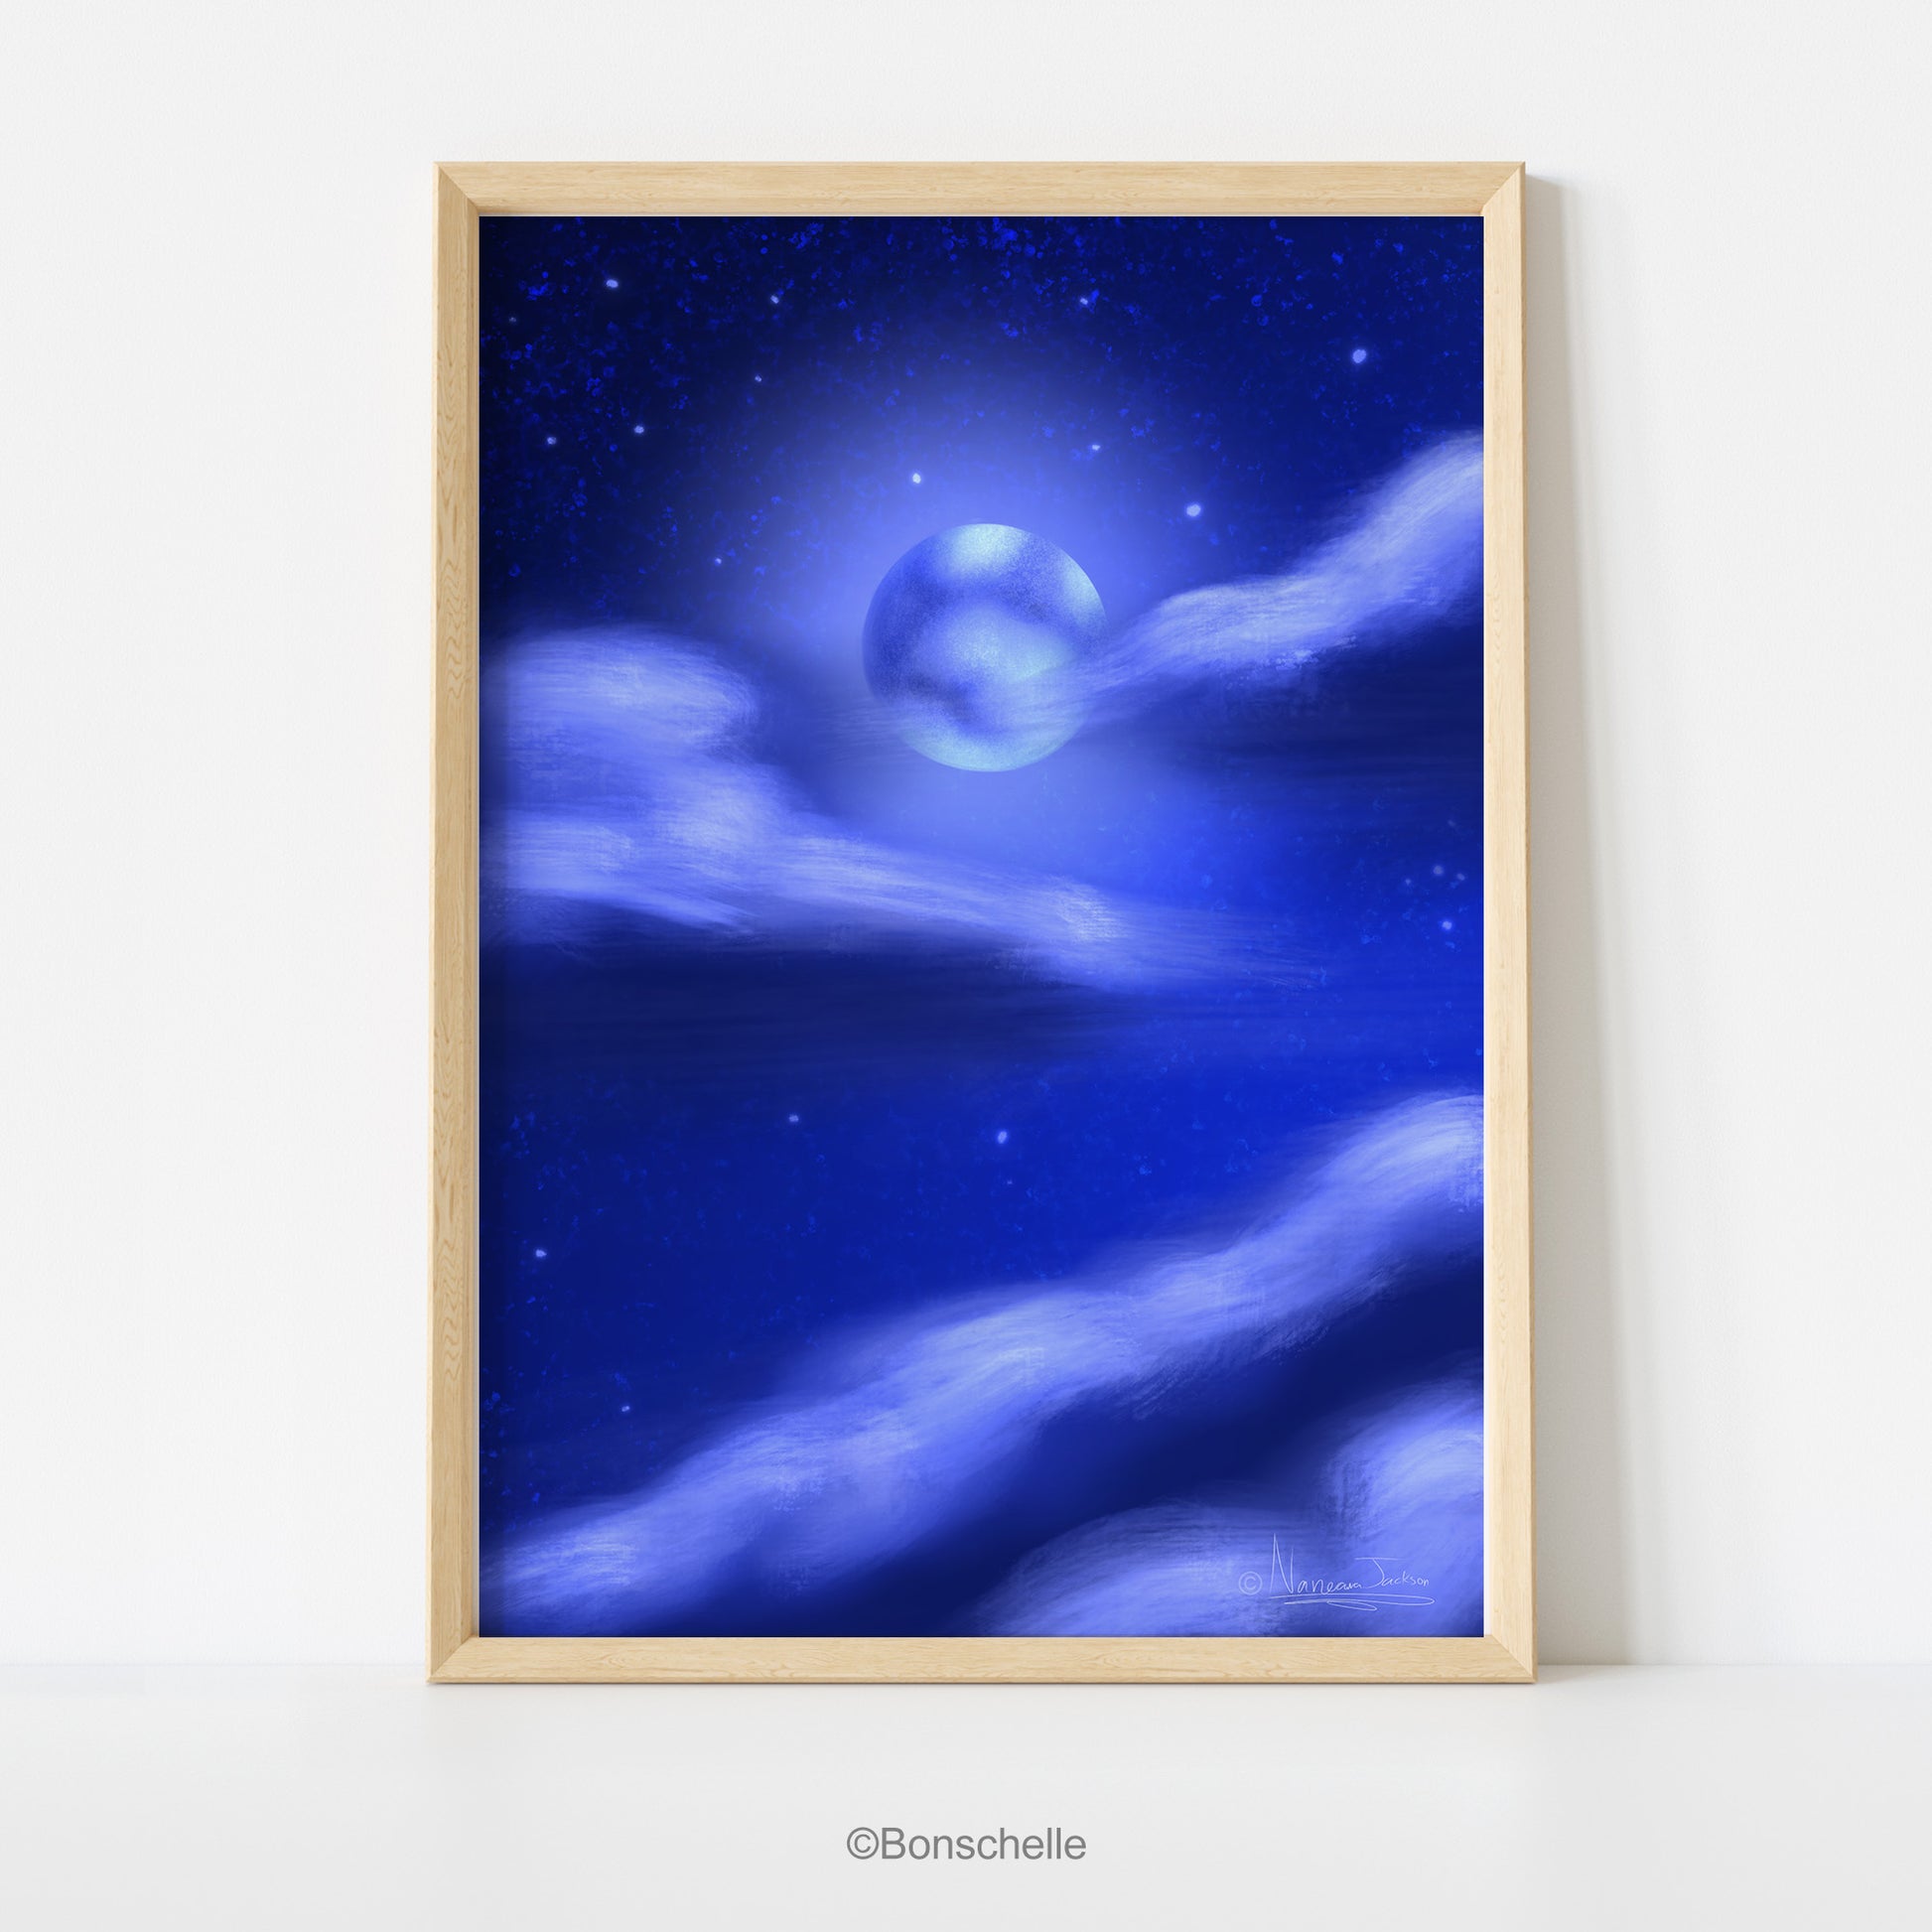 Original Art poster print with image of the Night Sky with full moon and clouds with pine-coloured wooden frame.